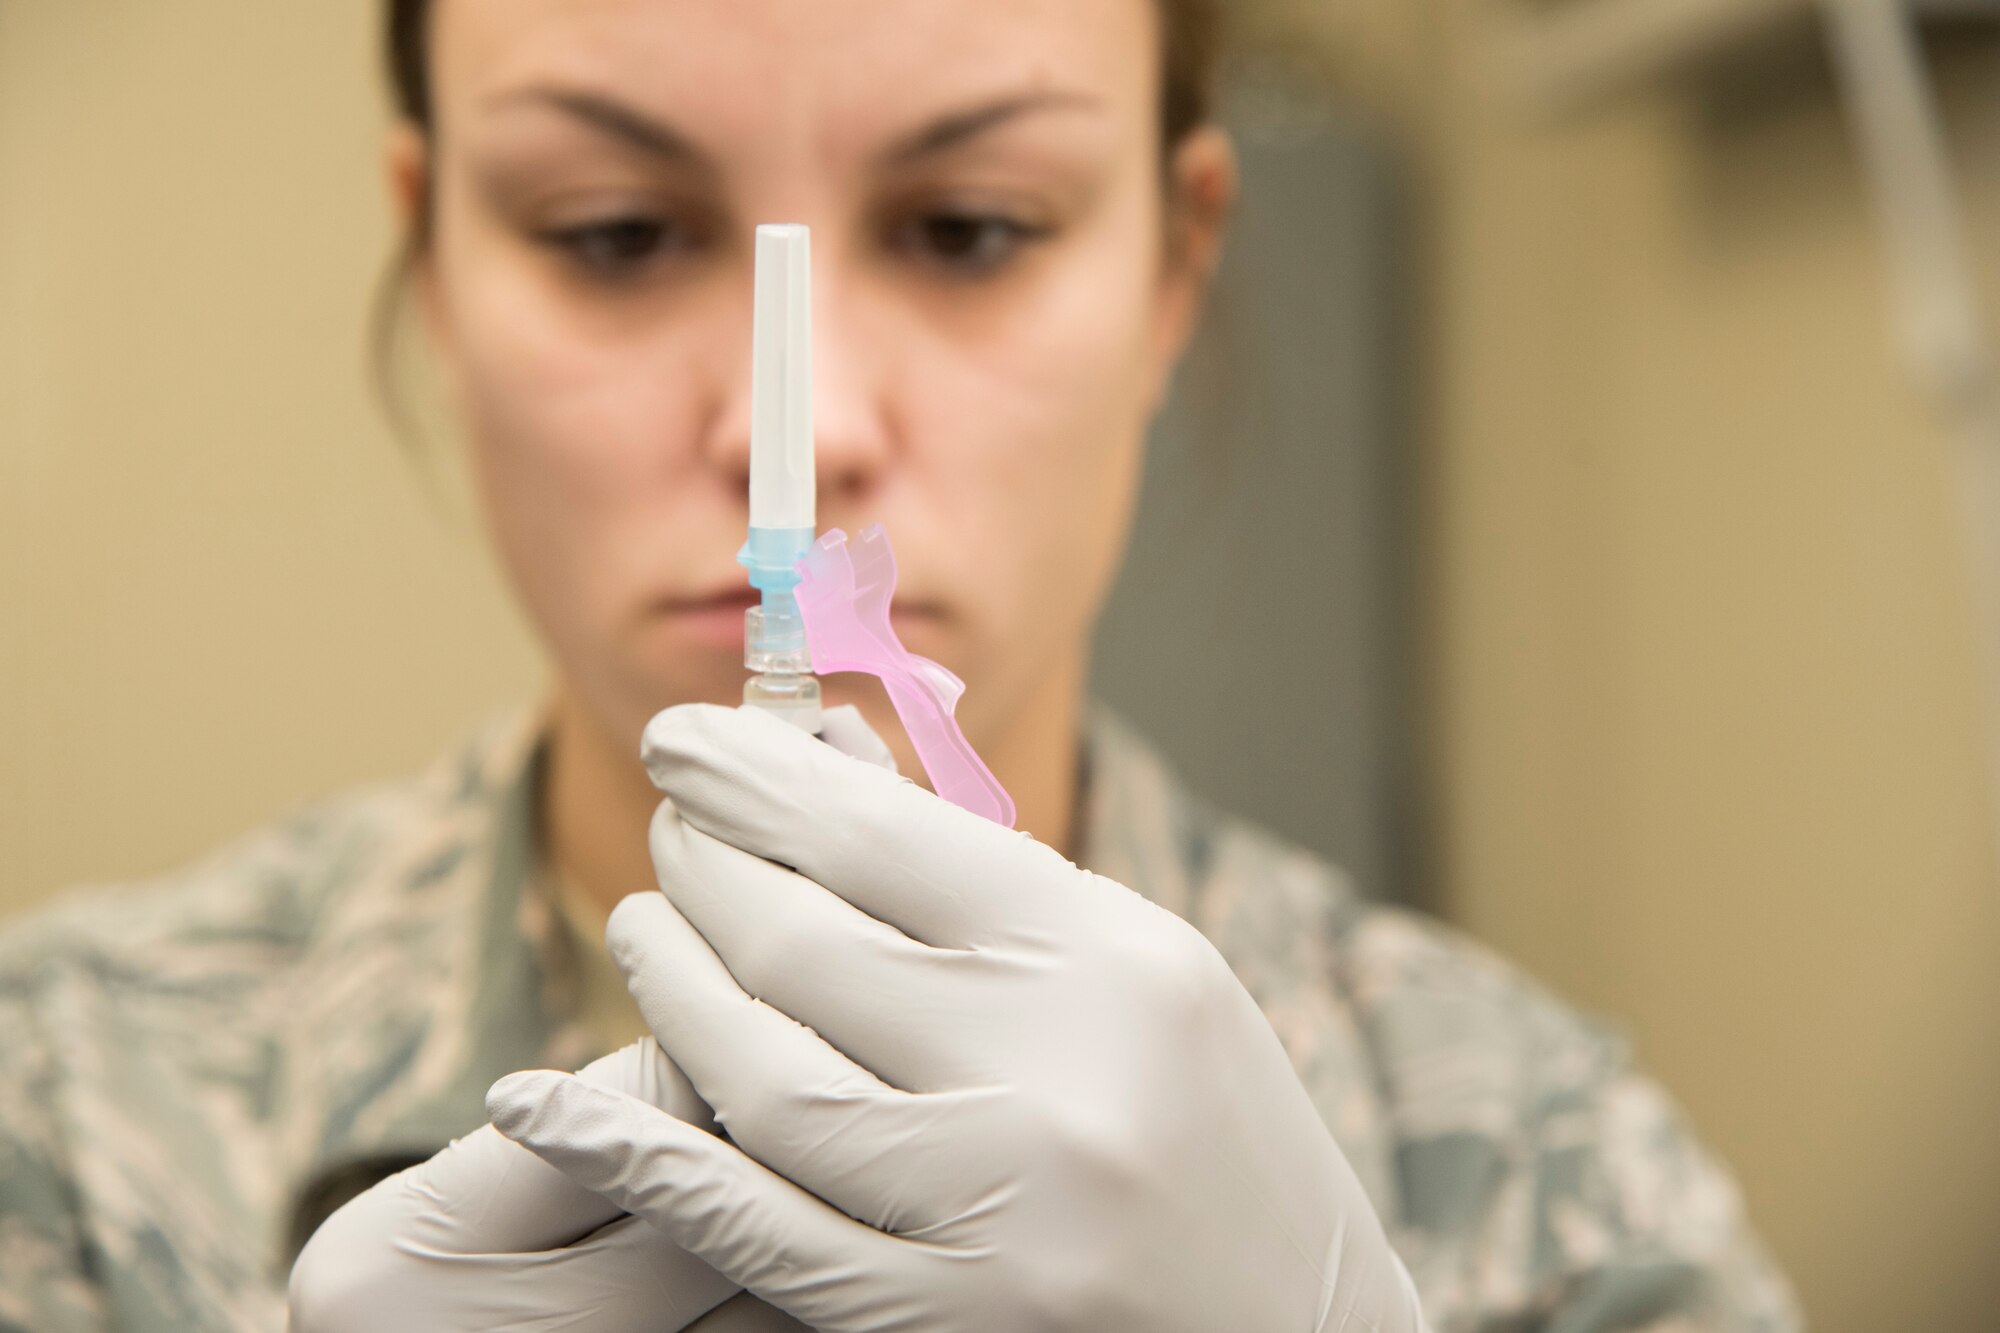 U.S. Air Force Staff Sgt. Jamie Cristinzio, aerospace medical technician, 141 Air Refueling Squadron, prepares a flu shot at Joint Base McGuire-Dix-Lakehurst, New Jersey, Nov. 15, 2019. All wing members are required to receive their flu vaccine as a part of their individual medical readiness. (U.S. Air National Guard photo by Airman 1st Class Andrea A. S. Williamson)